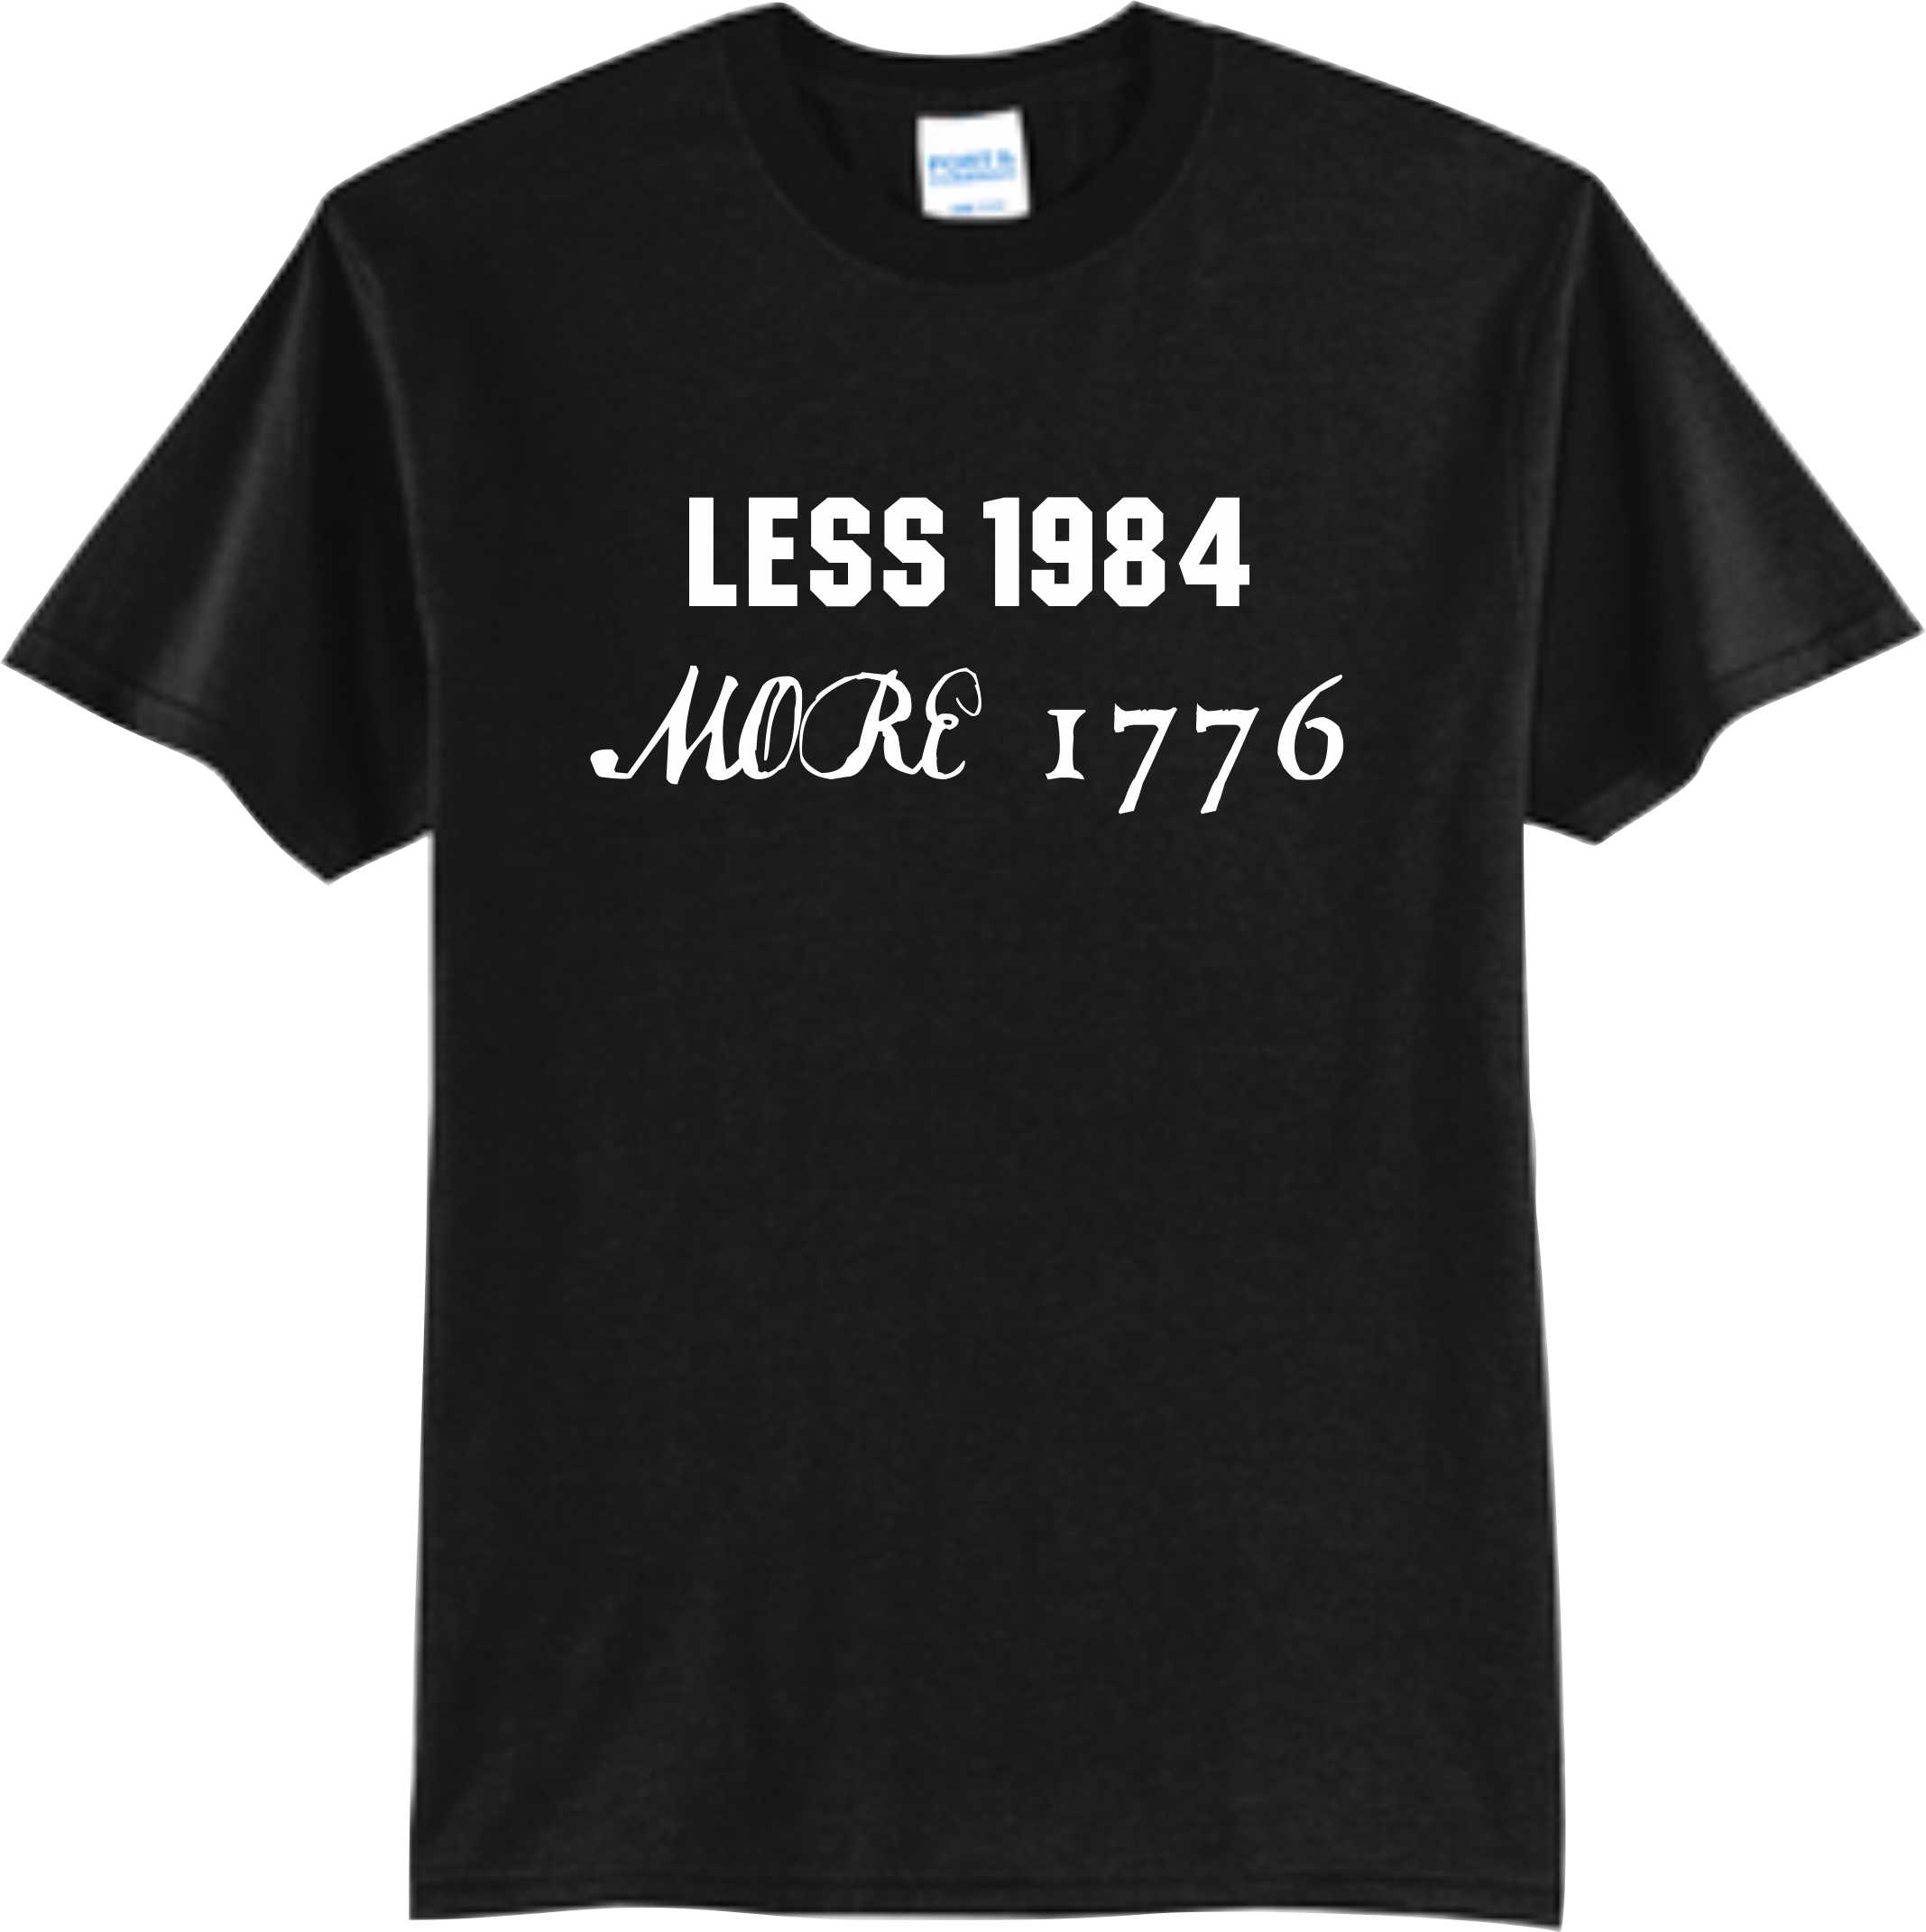 Less 1984 More 1776